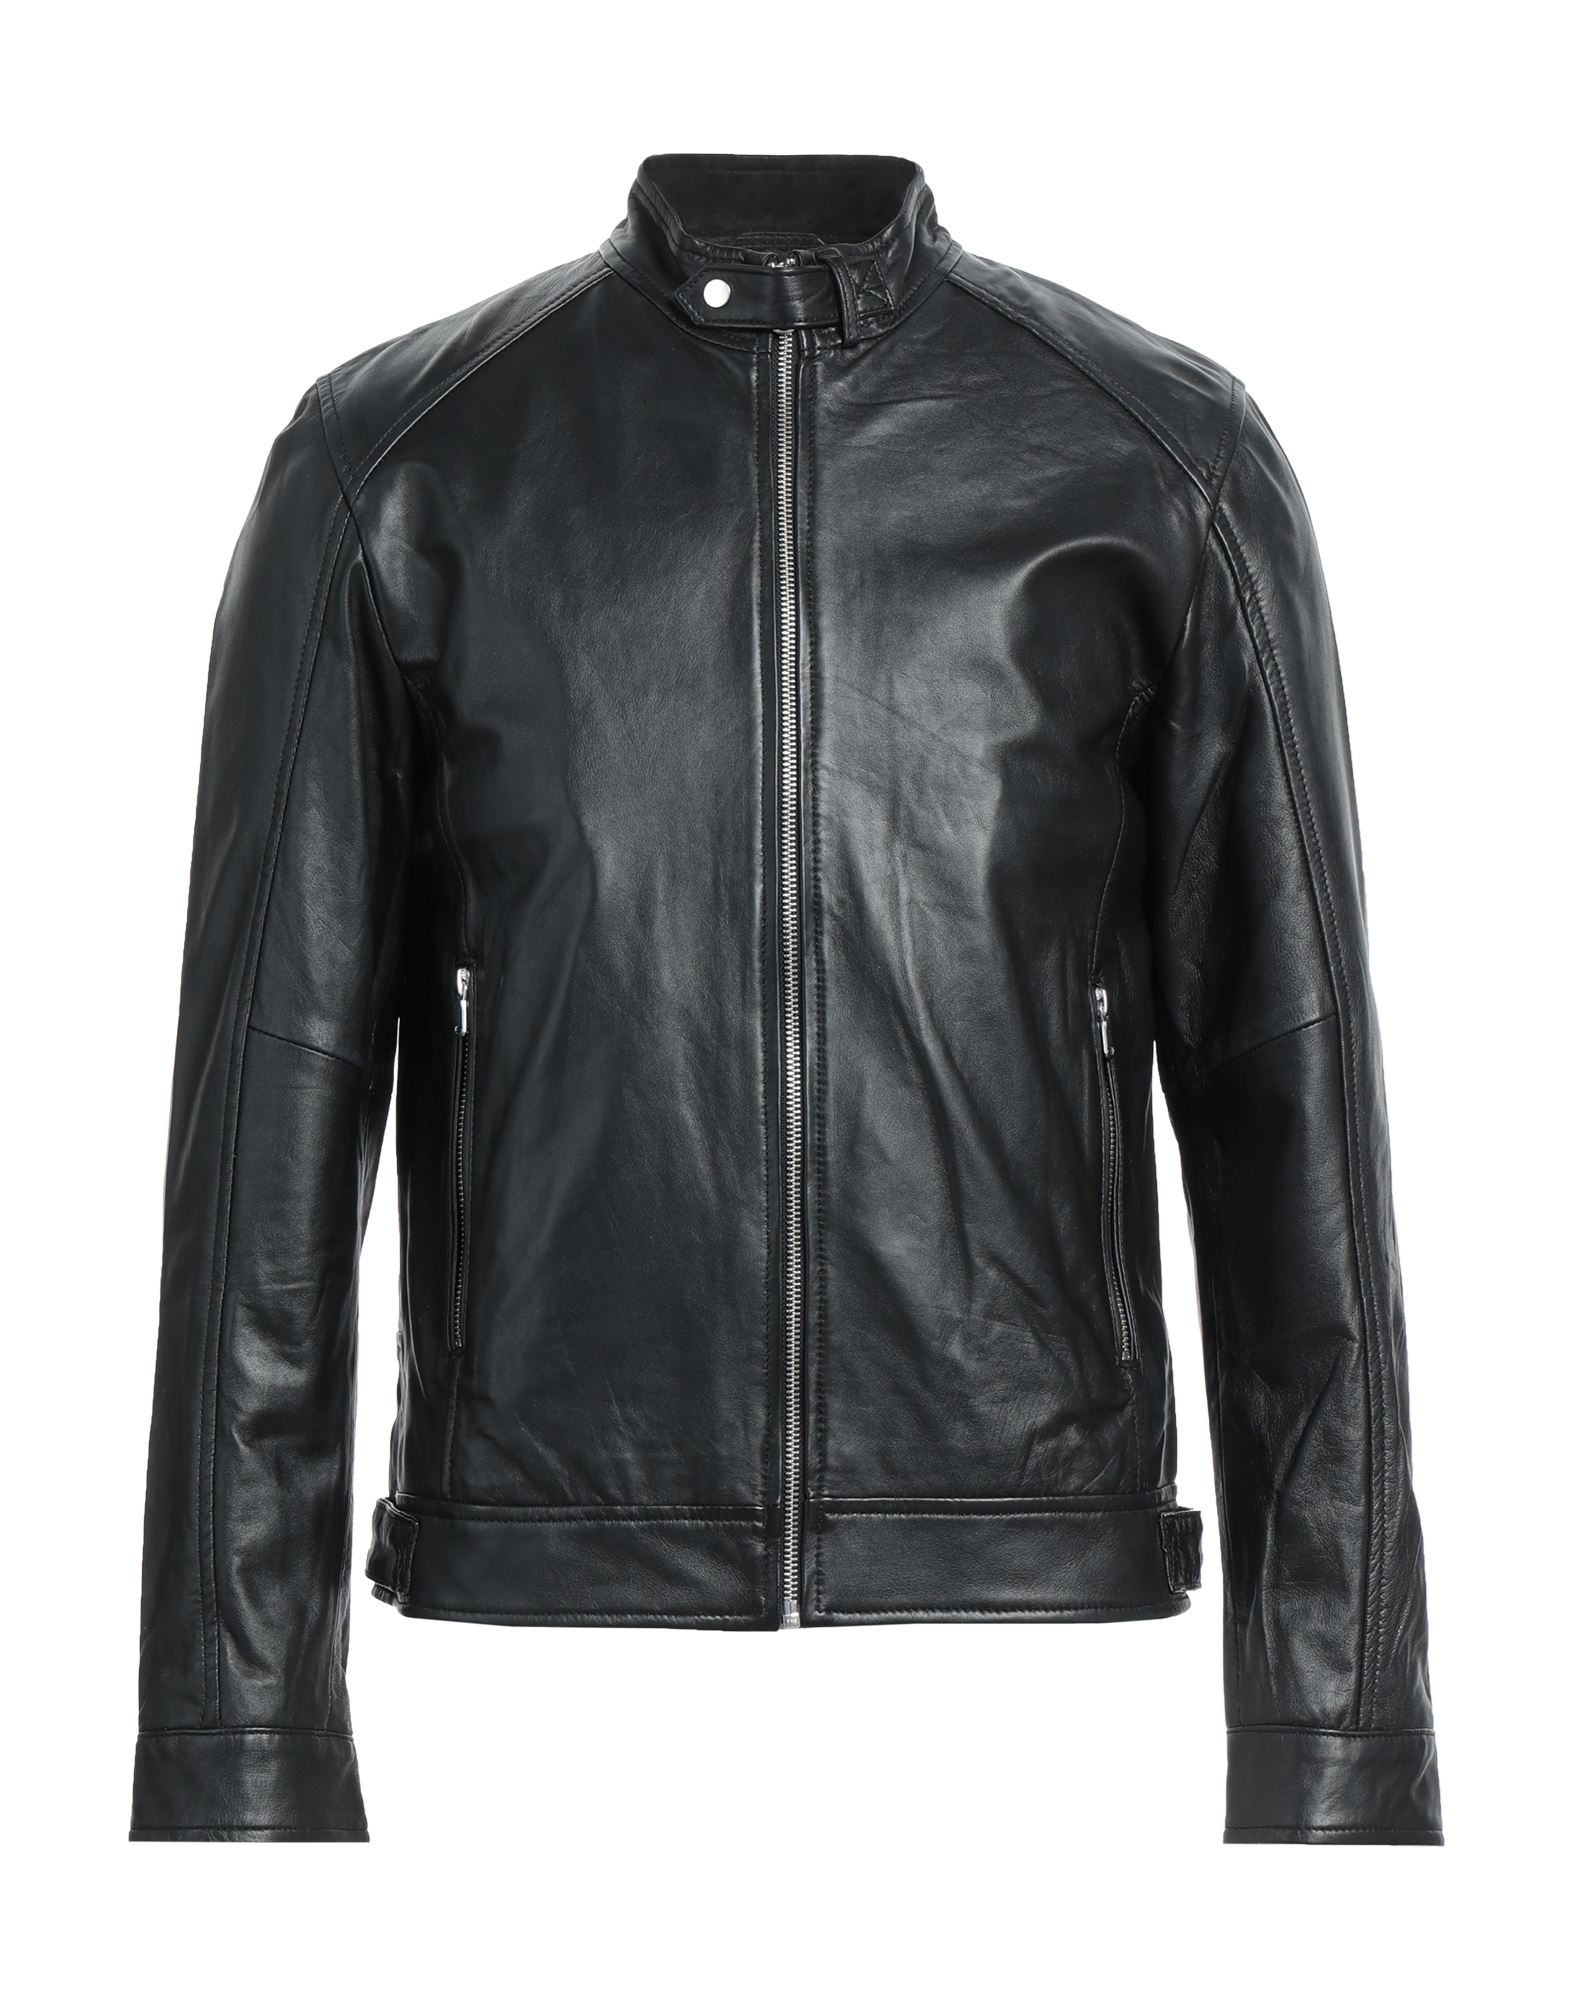 Andrea D'amico Man Jacket Black Size 42 Leather